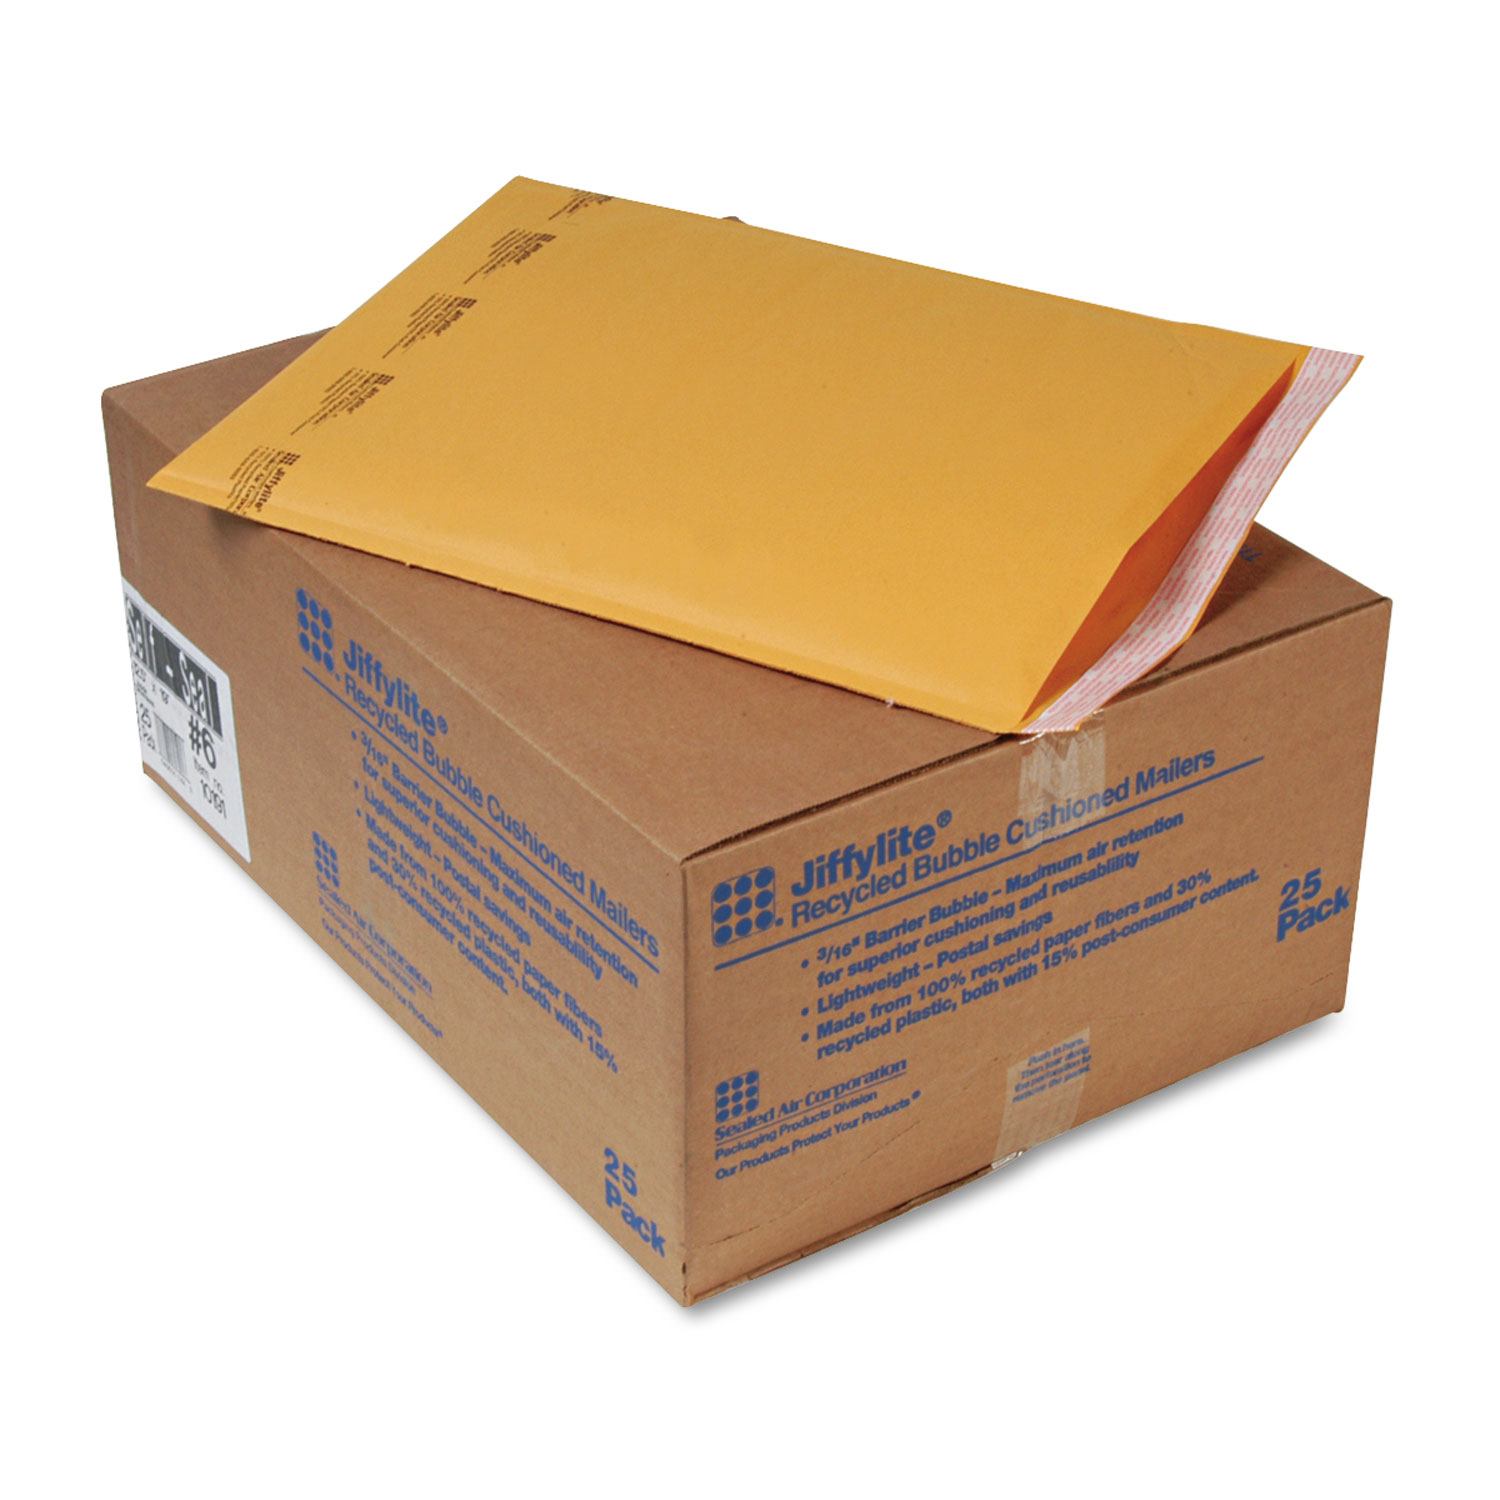  Sealed Air 10191 Jiffylite Self-Seal Bubble Mailer, #6, Barrier Bubble Lining, Self-Adhesive Closure, 12.5 x 19, Golden Brown Kraft, 25/Carton (SEL10191) 